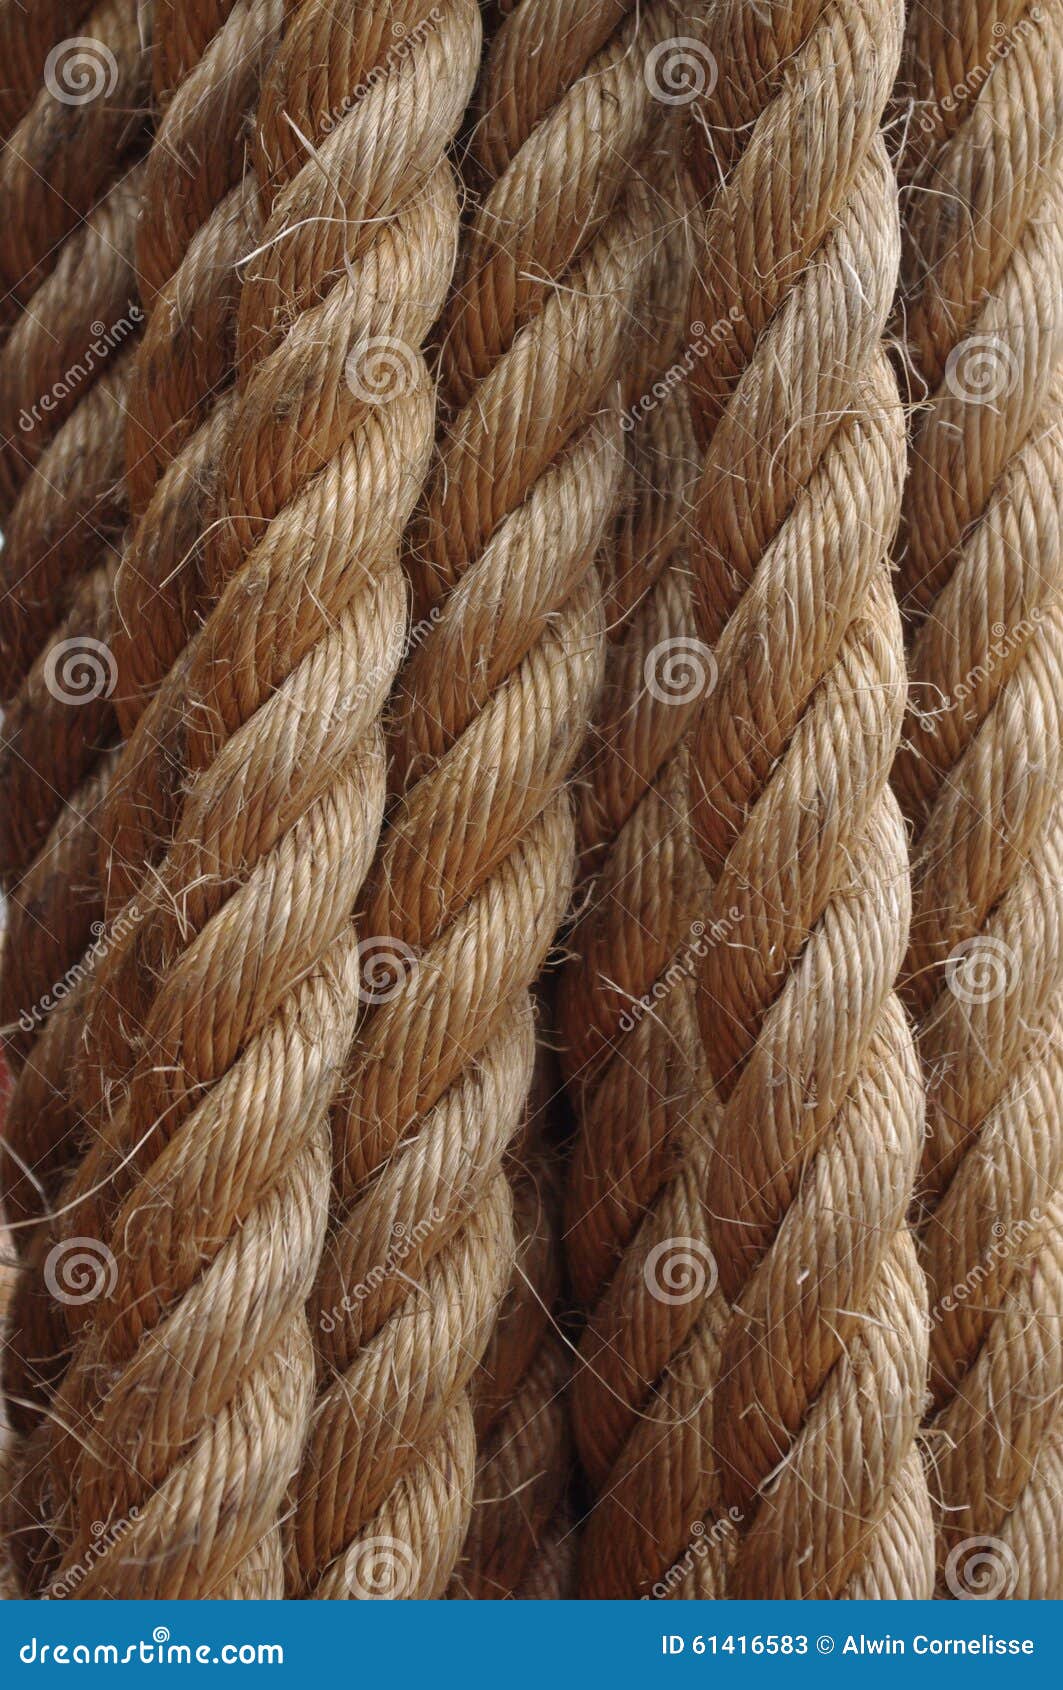 Strong, Hemp Rope, Cord or Line, with Rough Fiber, Made of Jute